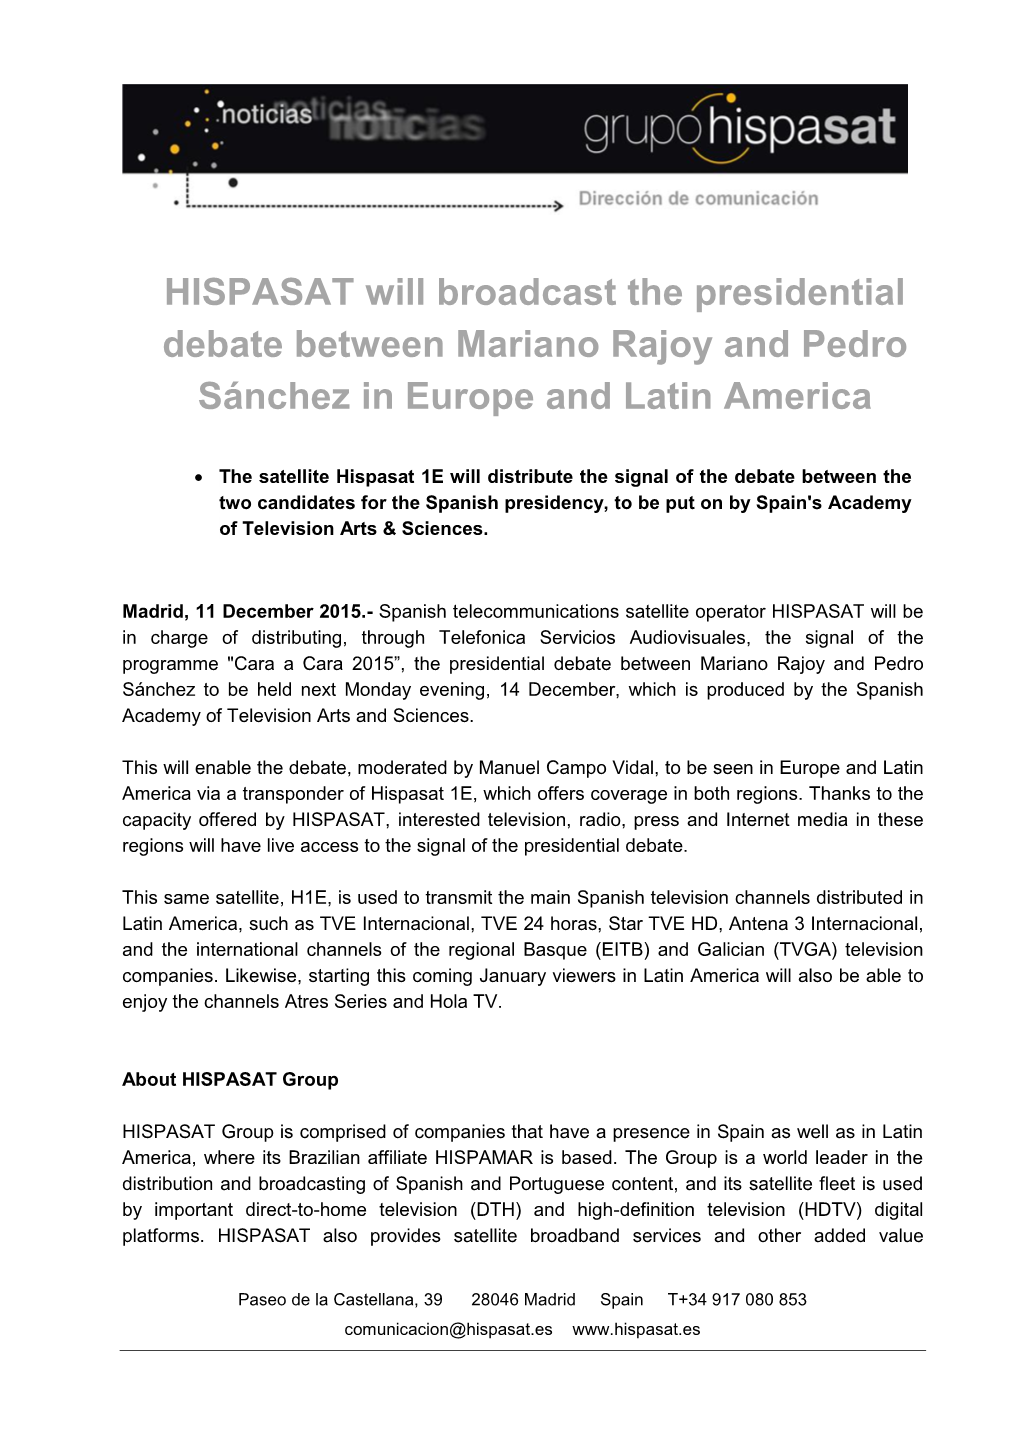 HISPASAT Will Broadcast the Presidential Debate Between Mariano Rajoy and Pedro Sánchez in Europe and Latin America